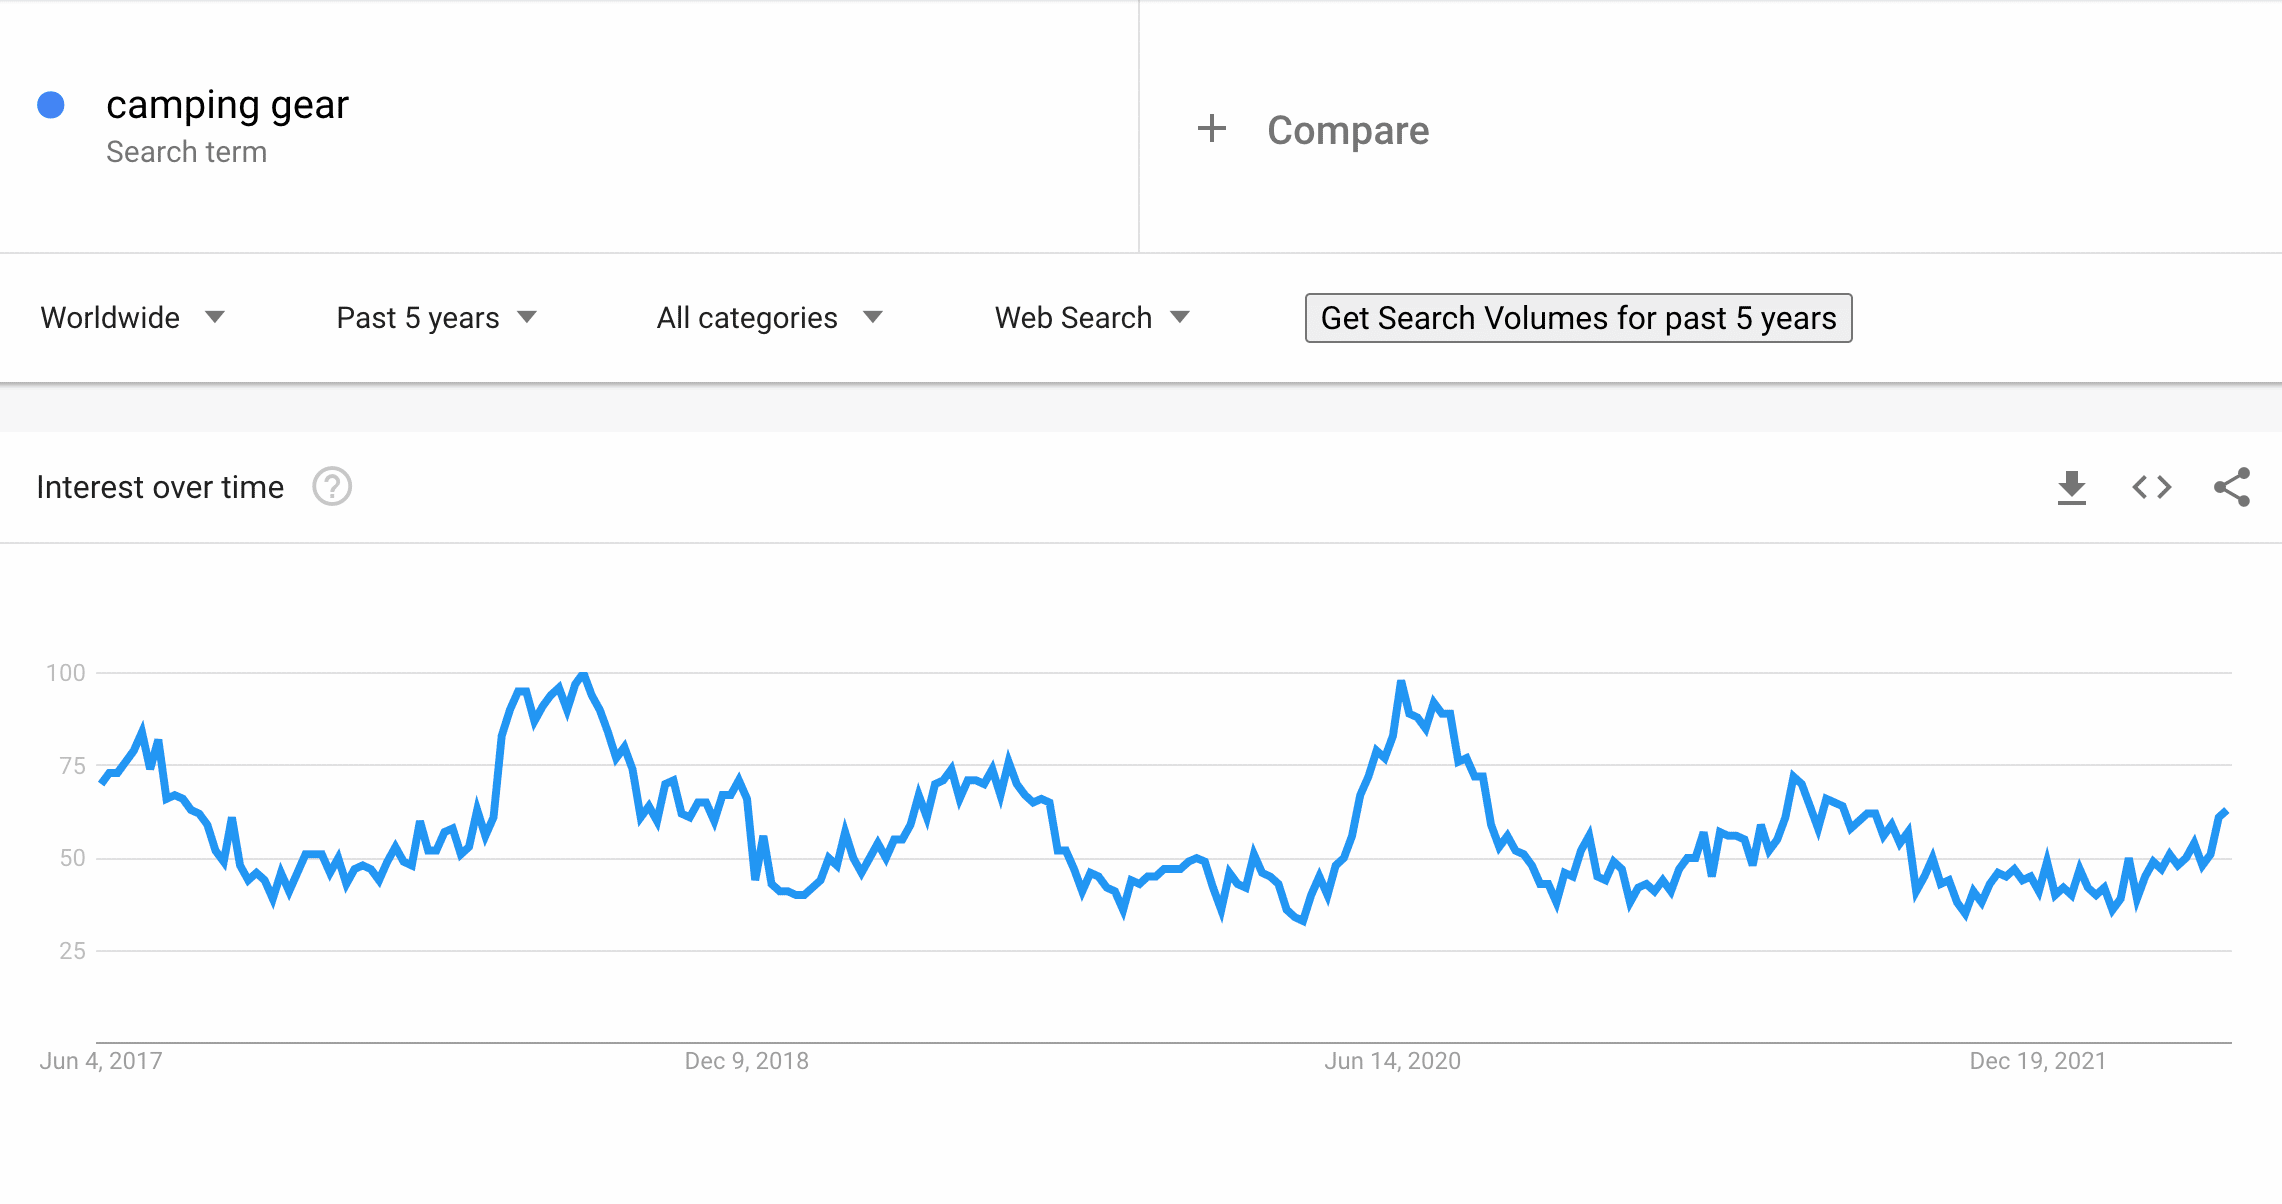 Camping gear on Google Trends